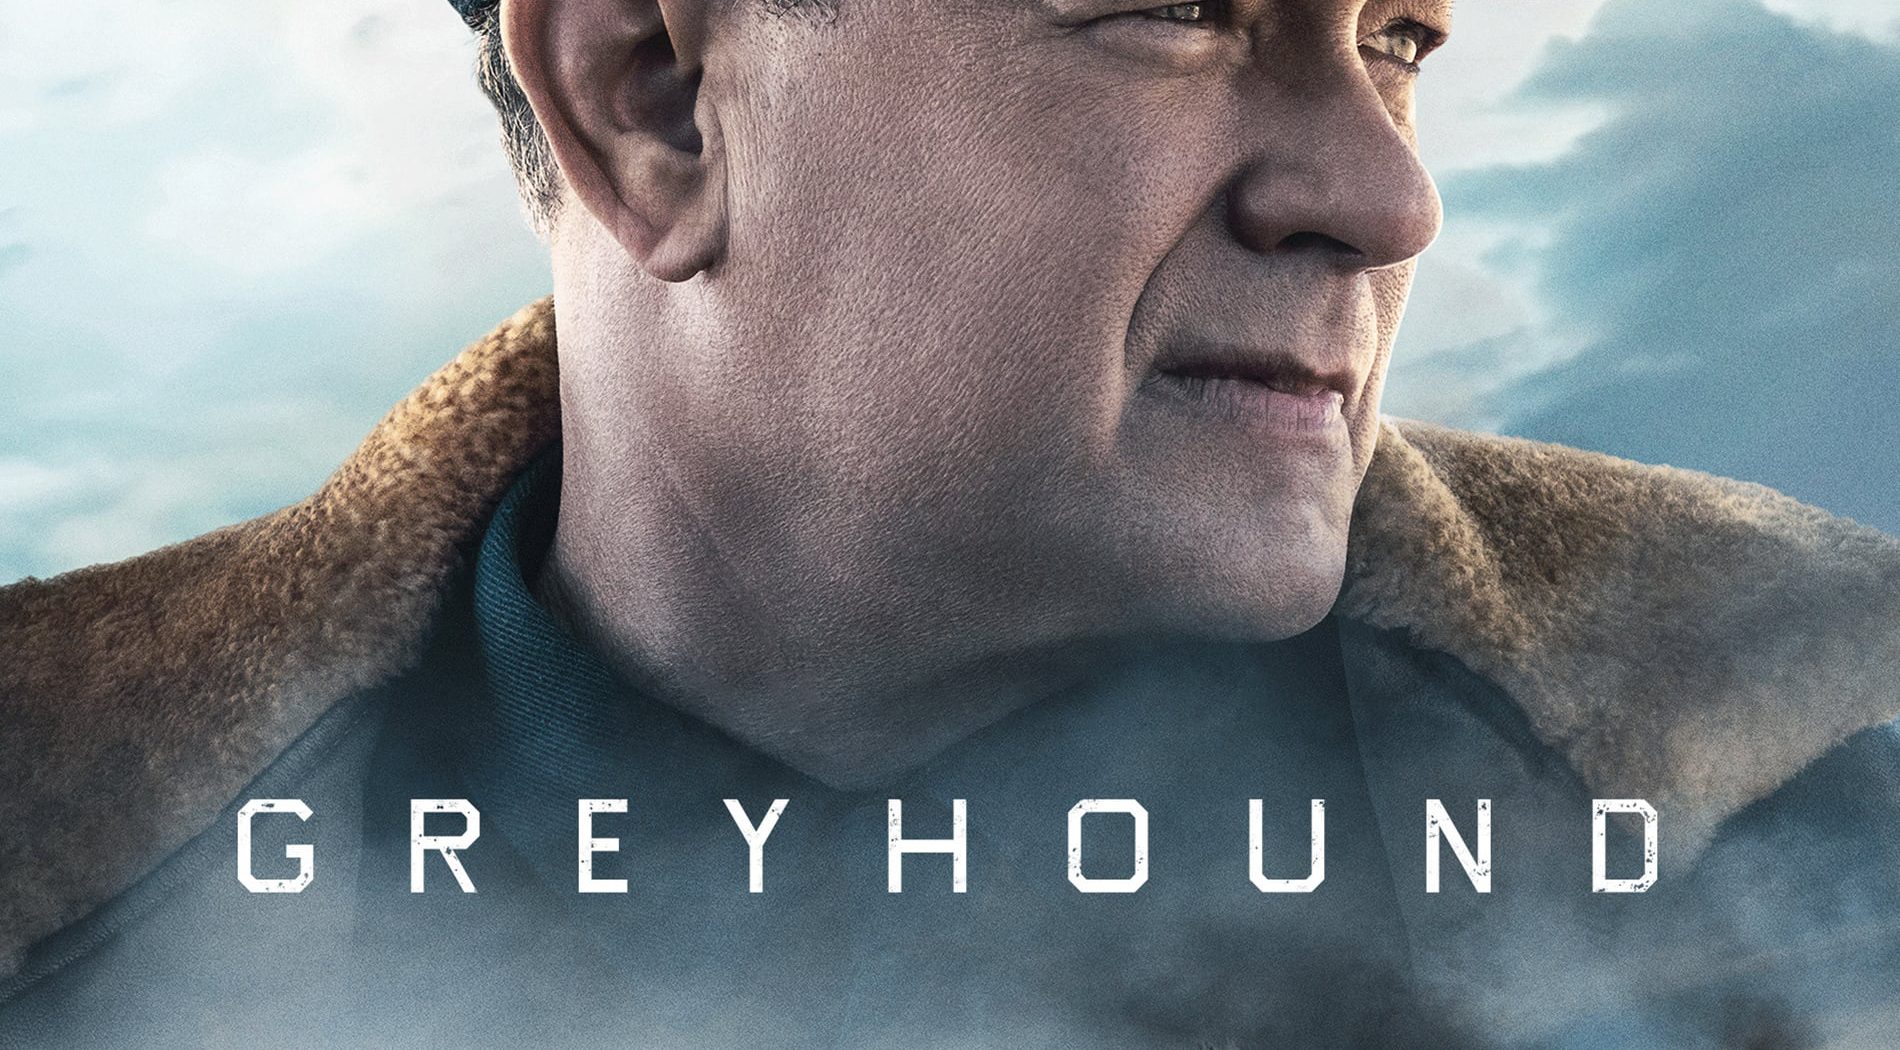 Poster for the movie "Greyhound"